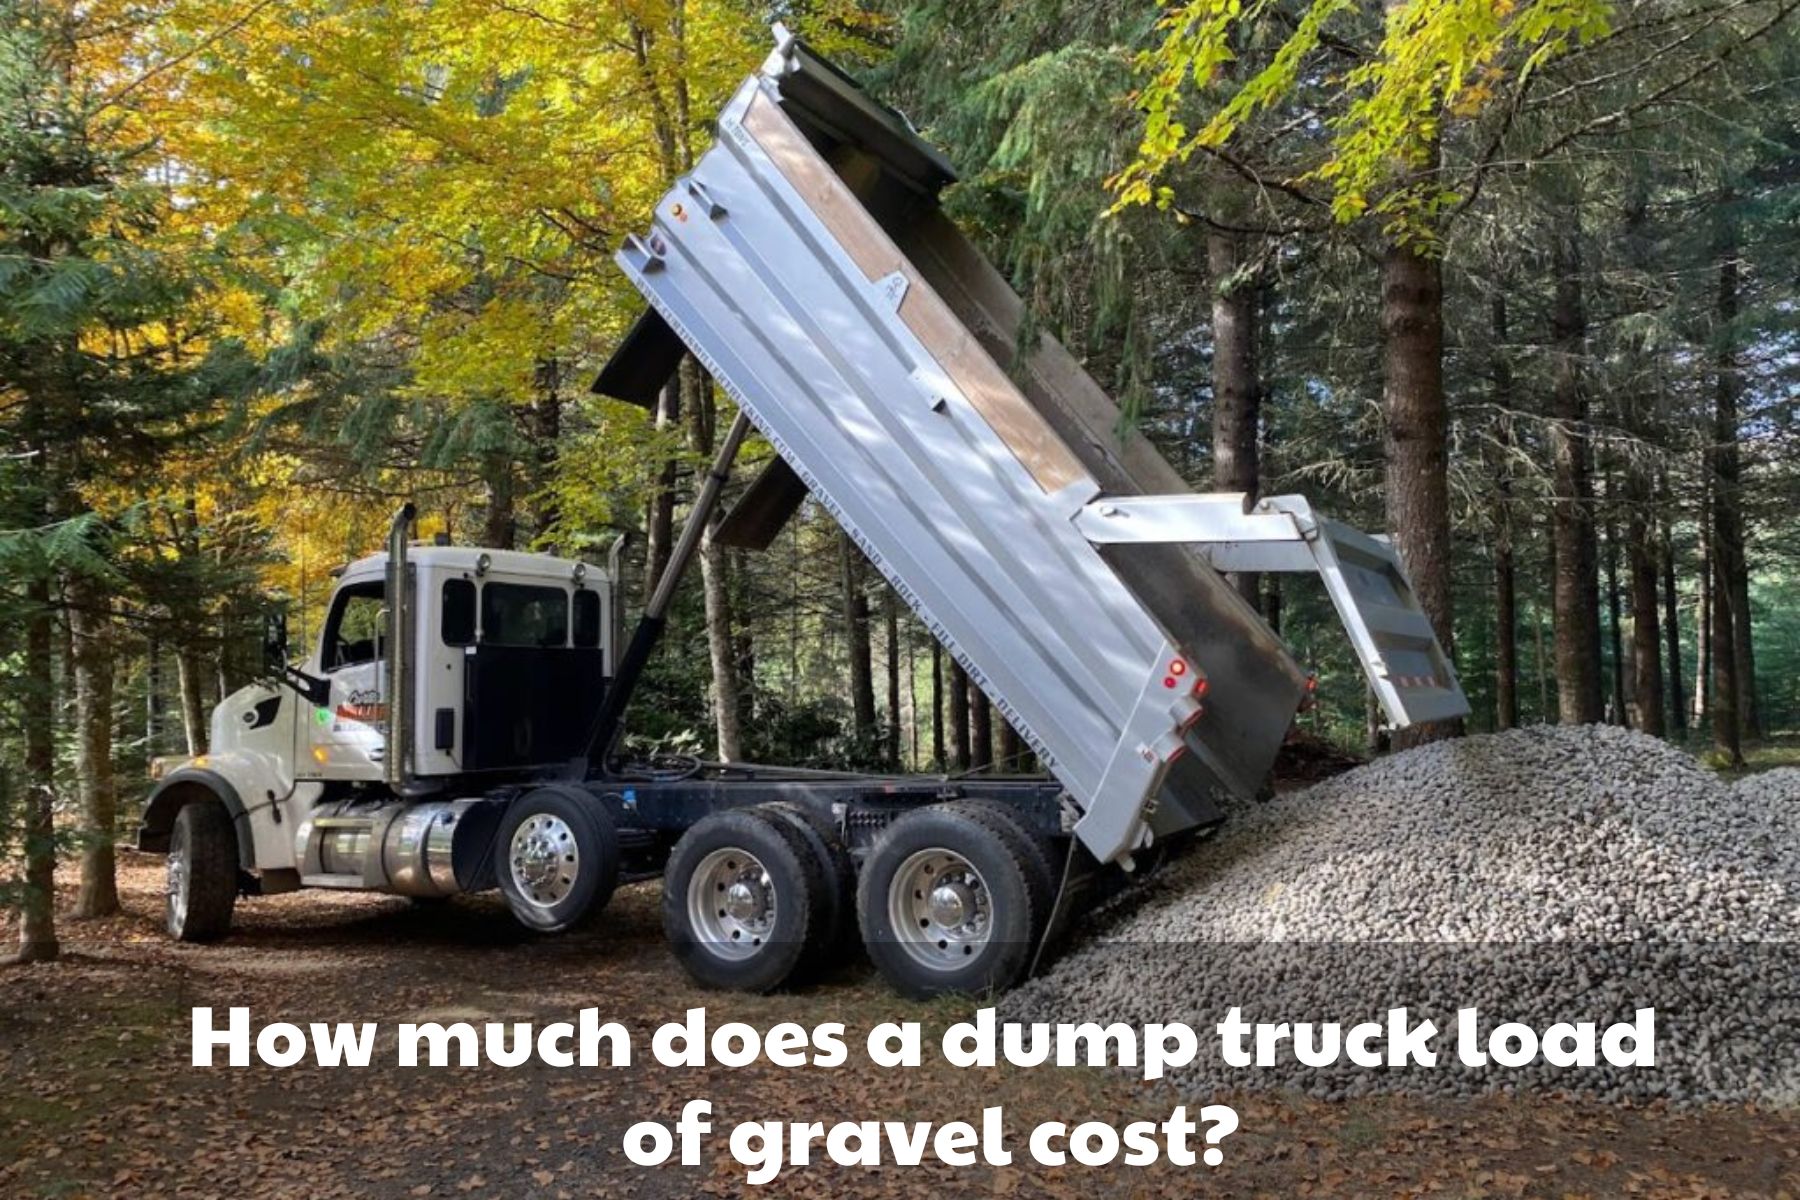 How-much-does-a-dump truck-load-of gravel-cost